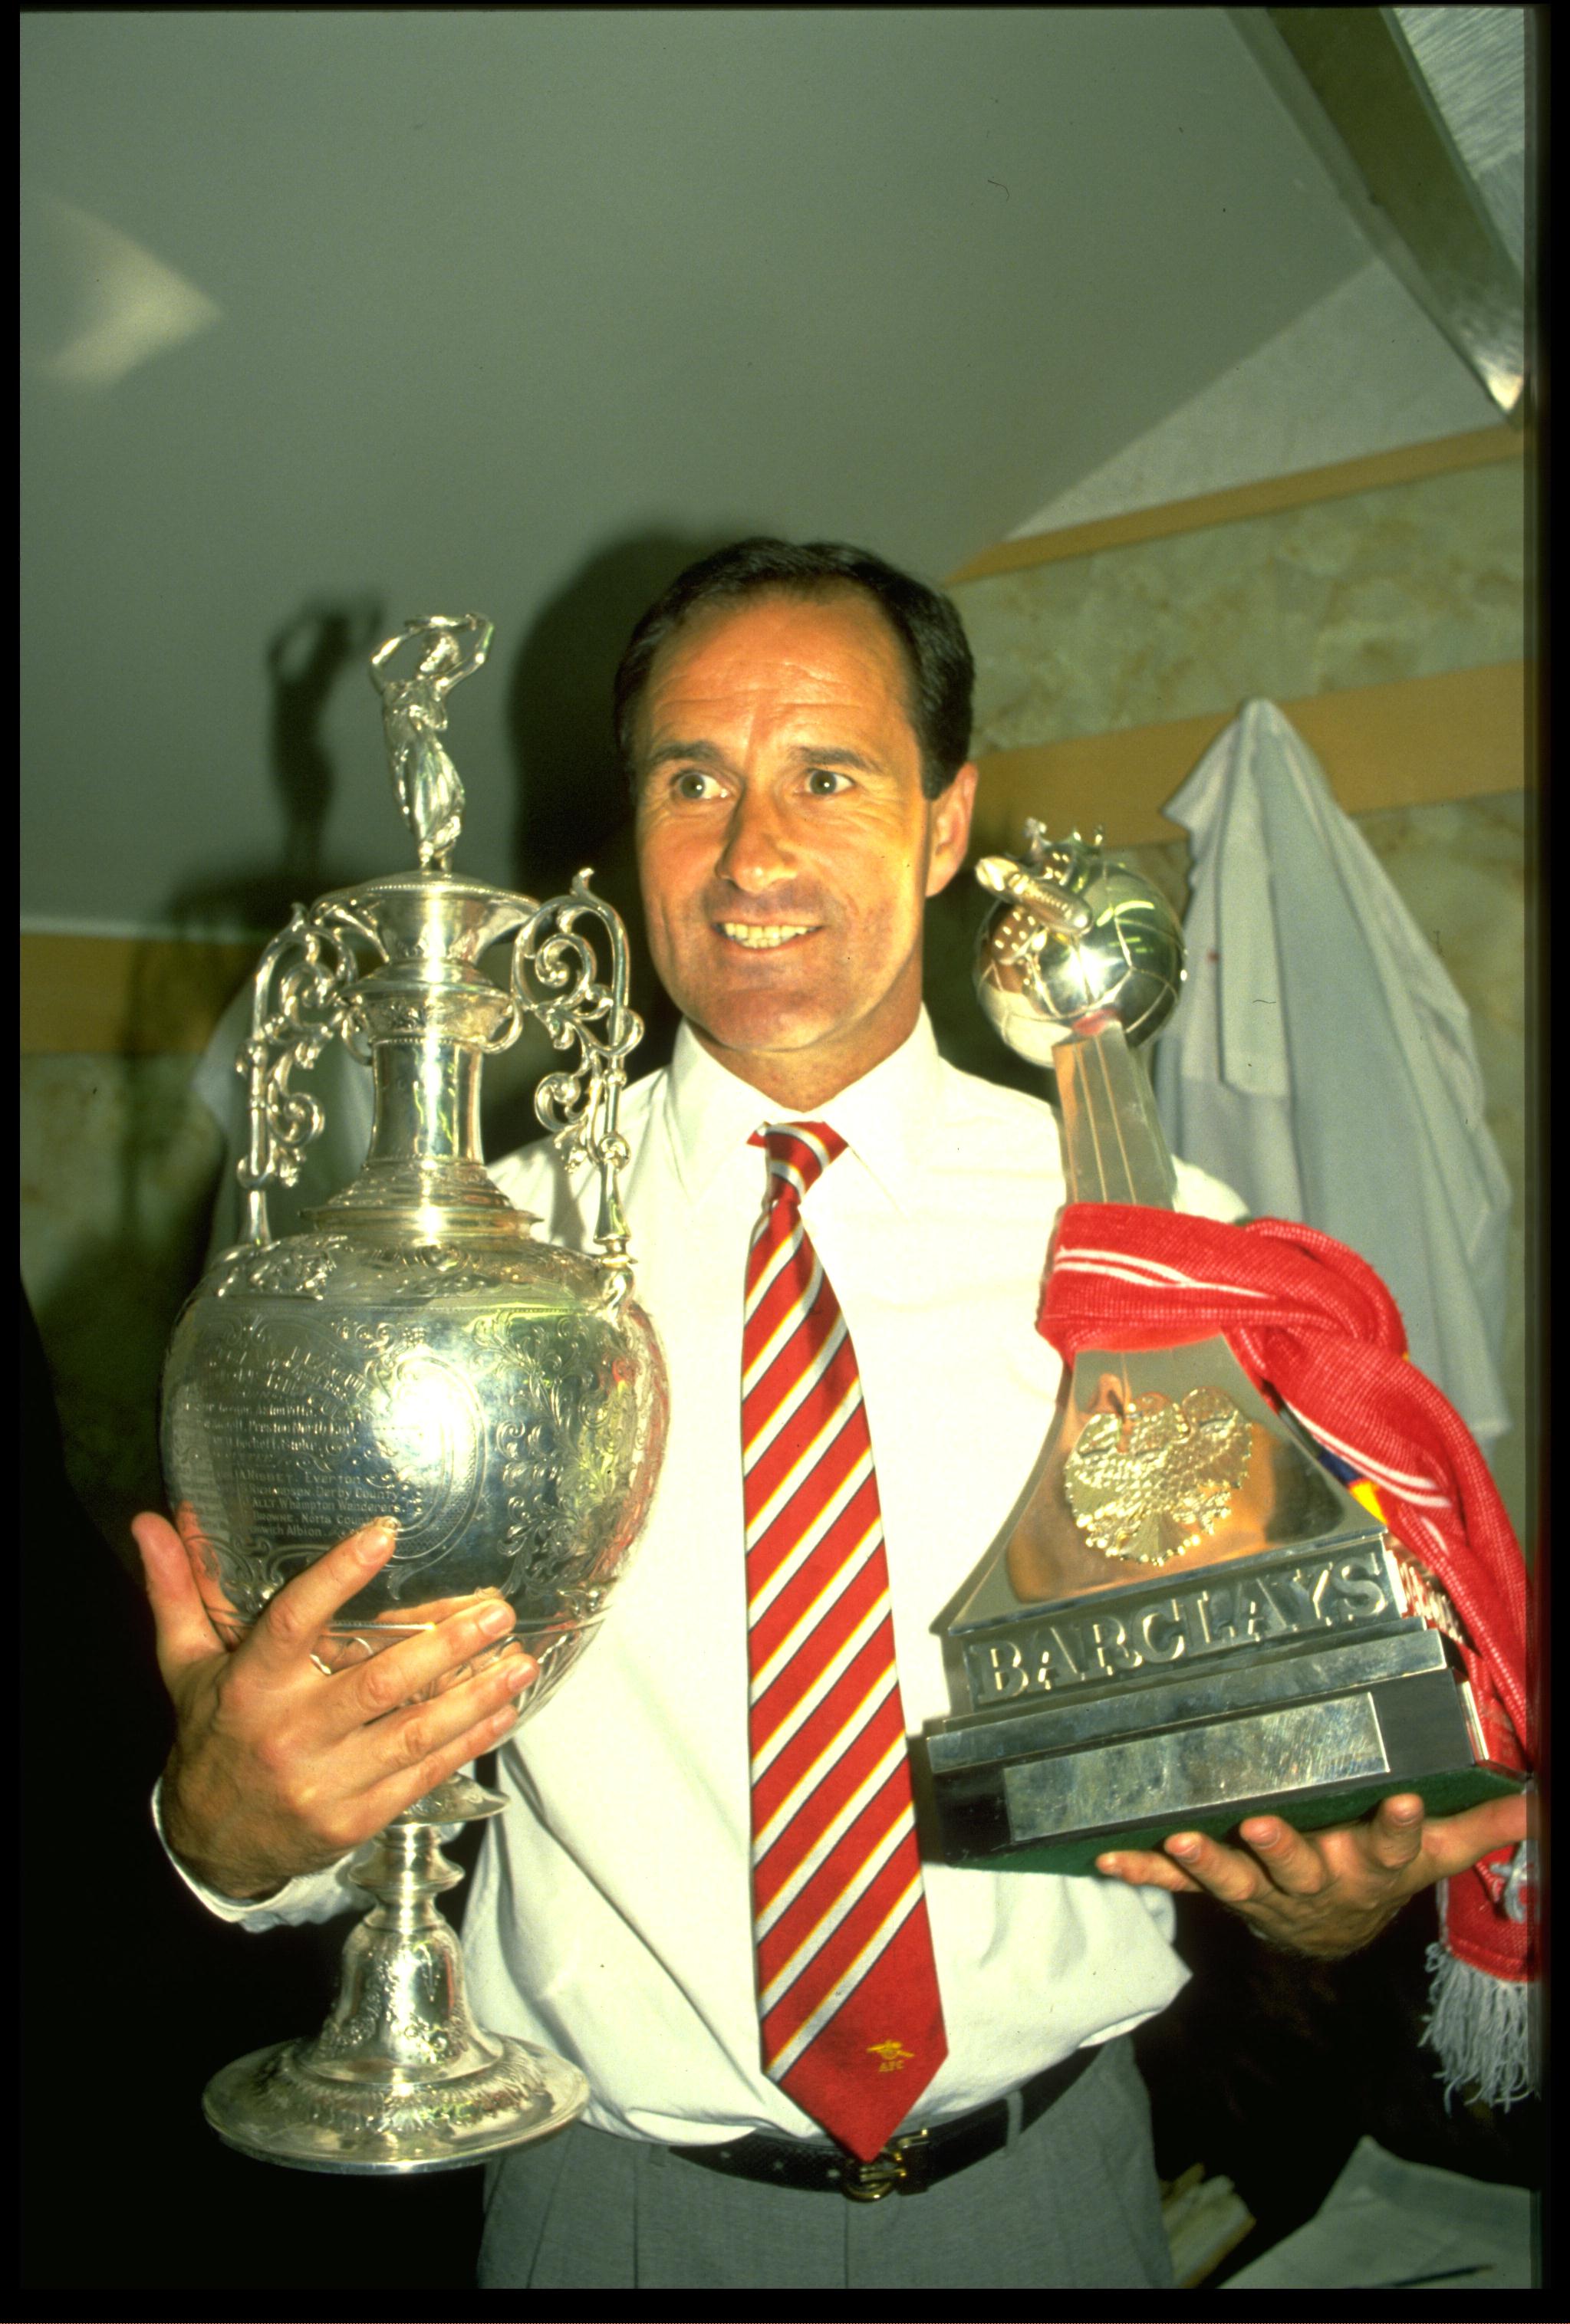 26 MAY 1989:  ARSENAL MANAGER GEORGE GRAHAM HOLD THE LEAGUE CHAMPIONSHIP TROPHIES AFTER HIS TEAM HAD BEATEN LIVERPOOL 2-0 AT ANFIELD TO WIN THE CHAMPIONSHIP.